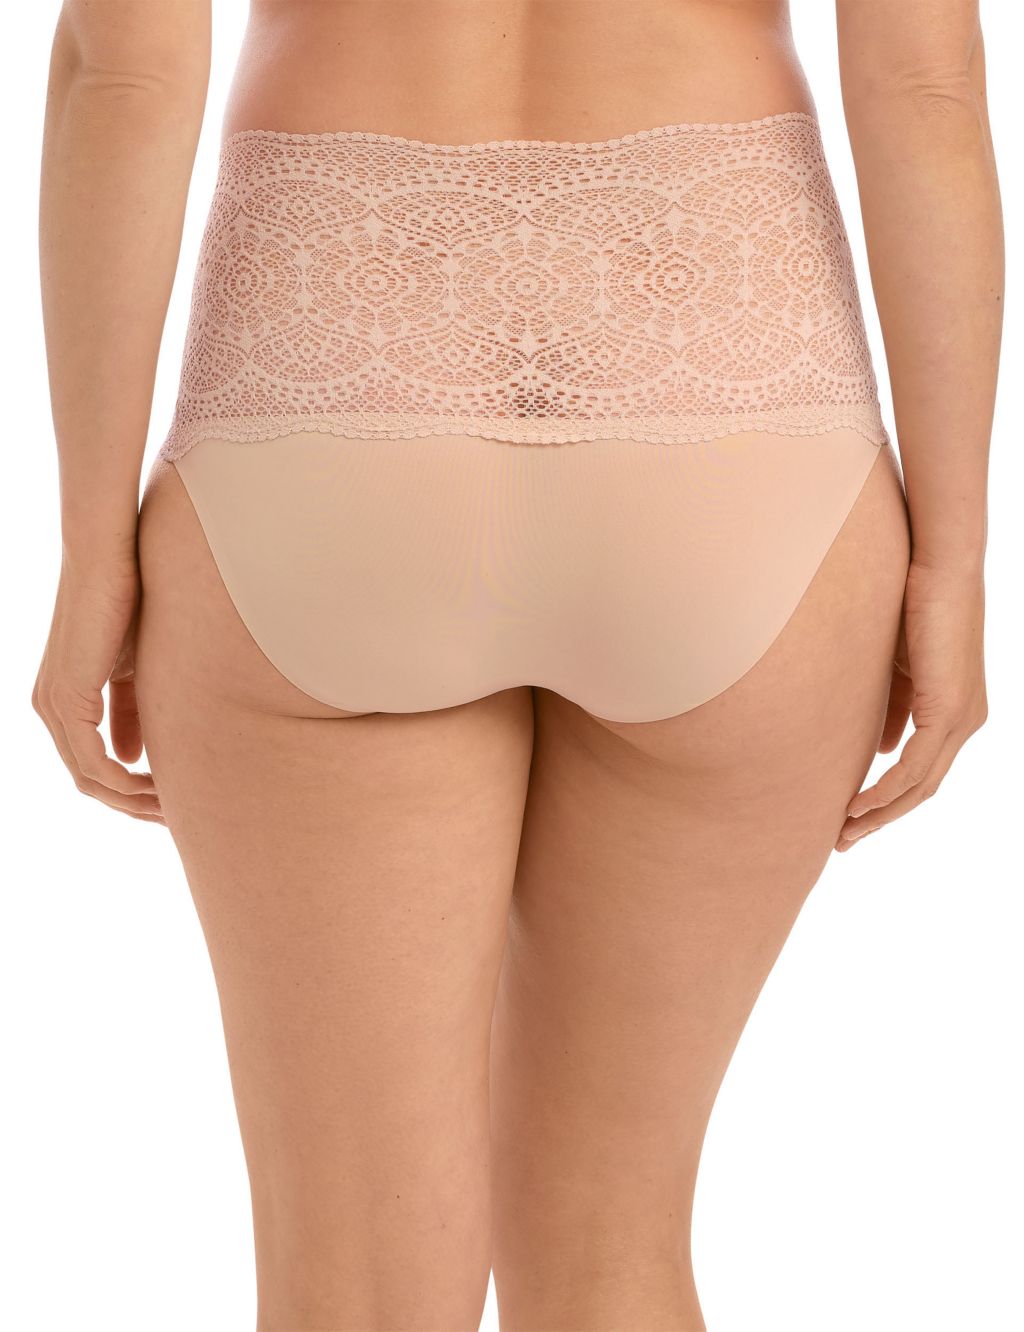 Lace Ease High Waisted Full Briefs image 3